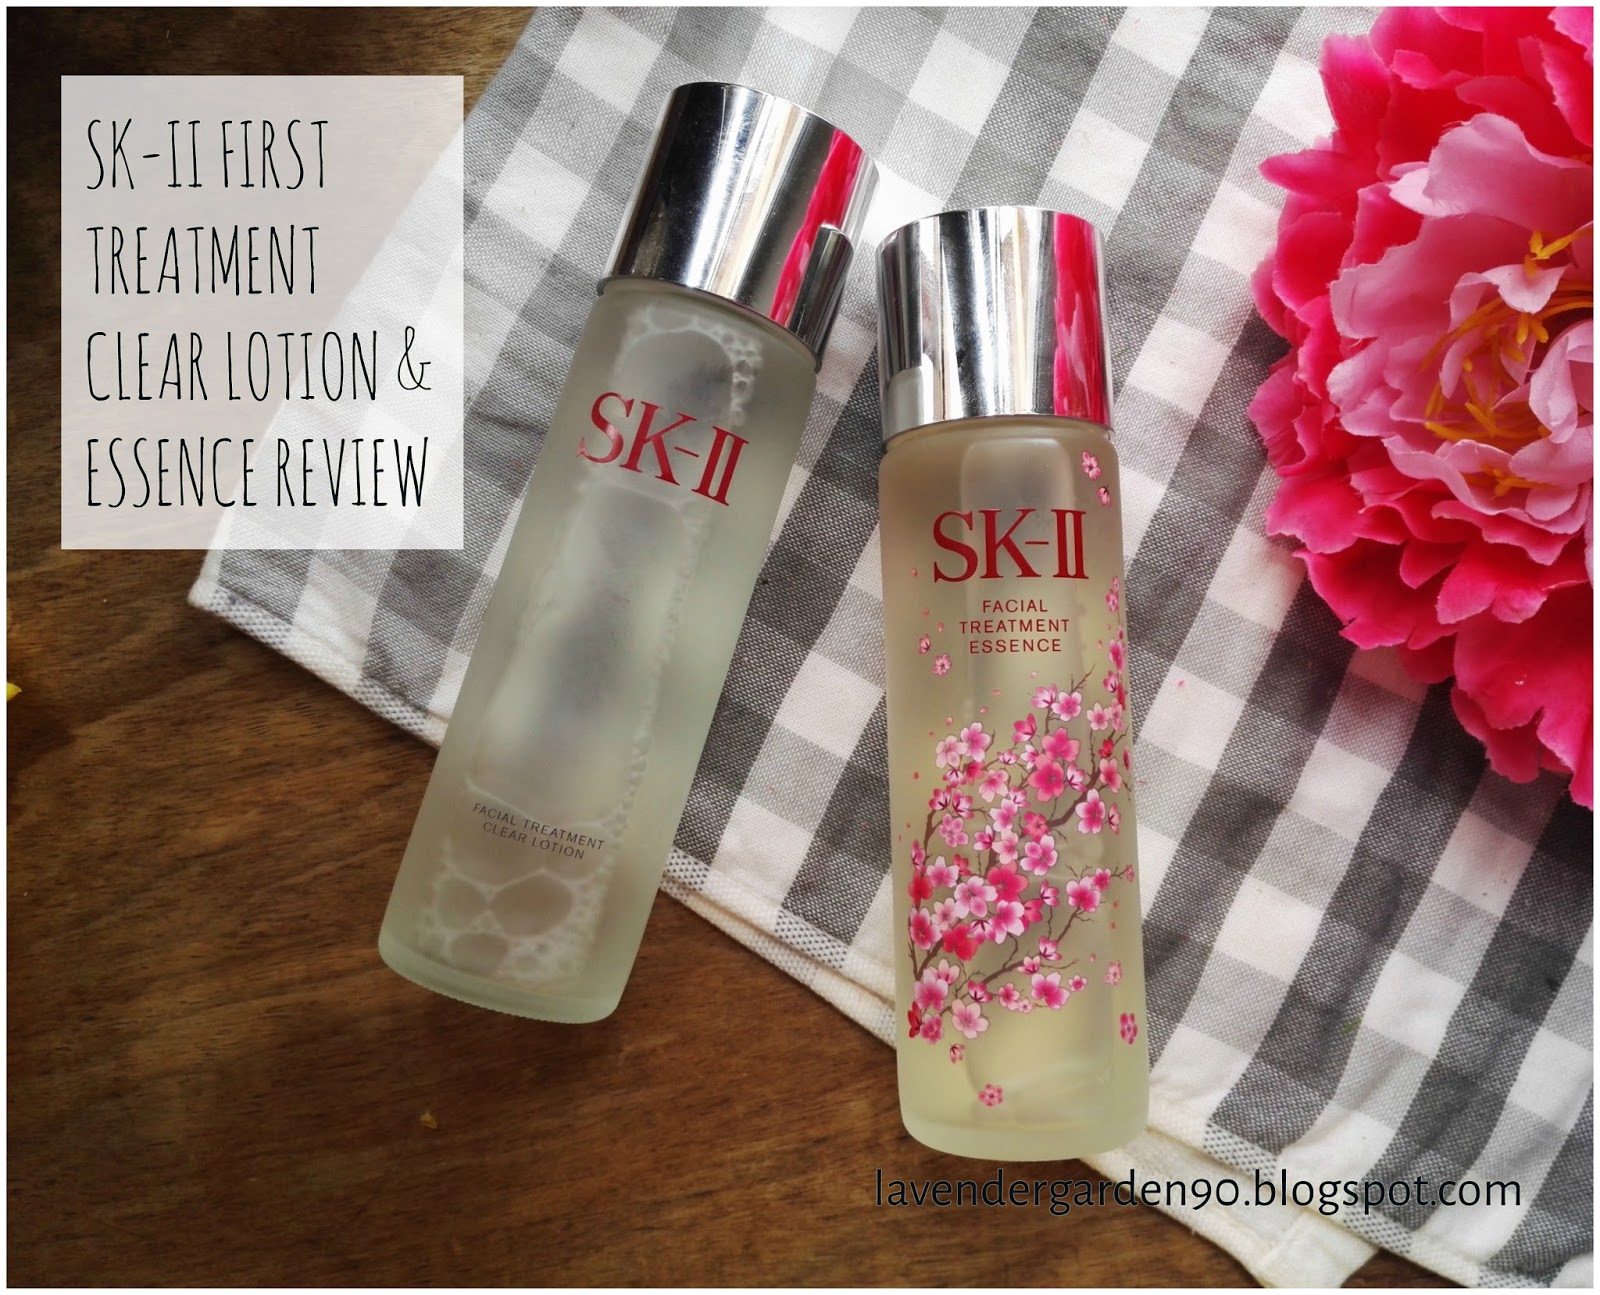 Carolyn S Lavender Garden Review Sk Ii Facial Treatment Clear Lotion And Facial Treatment Essence